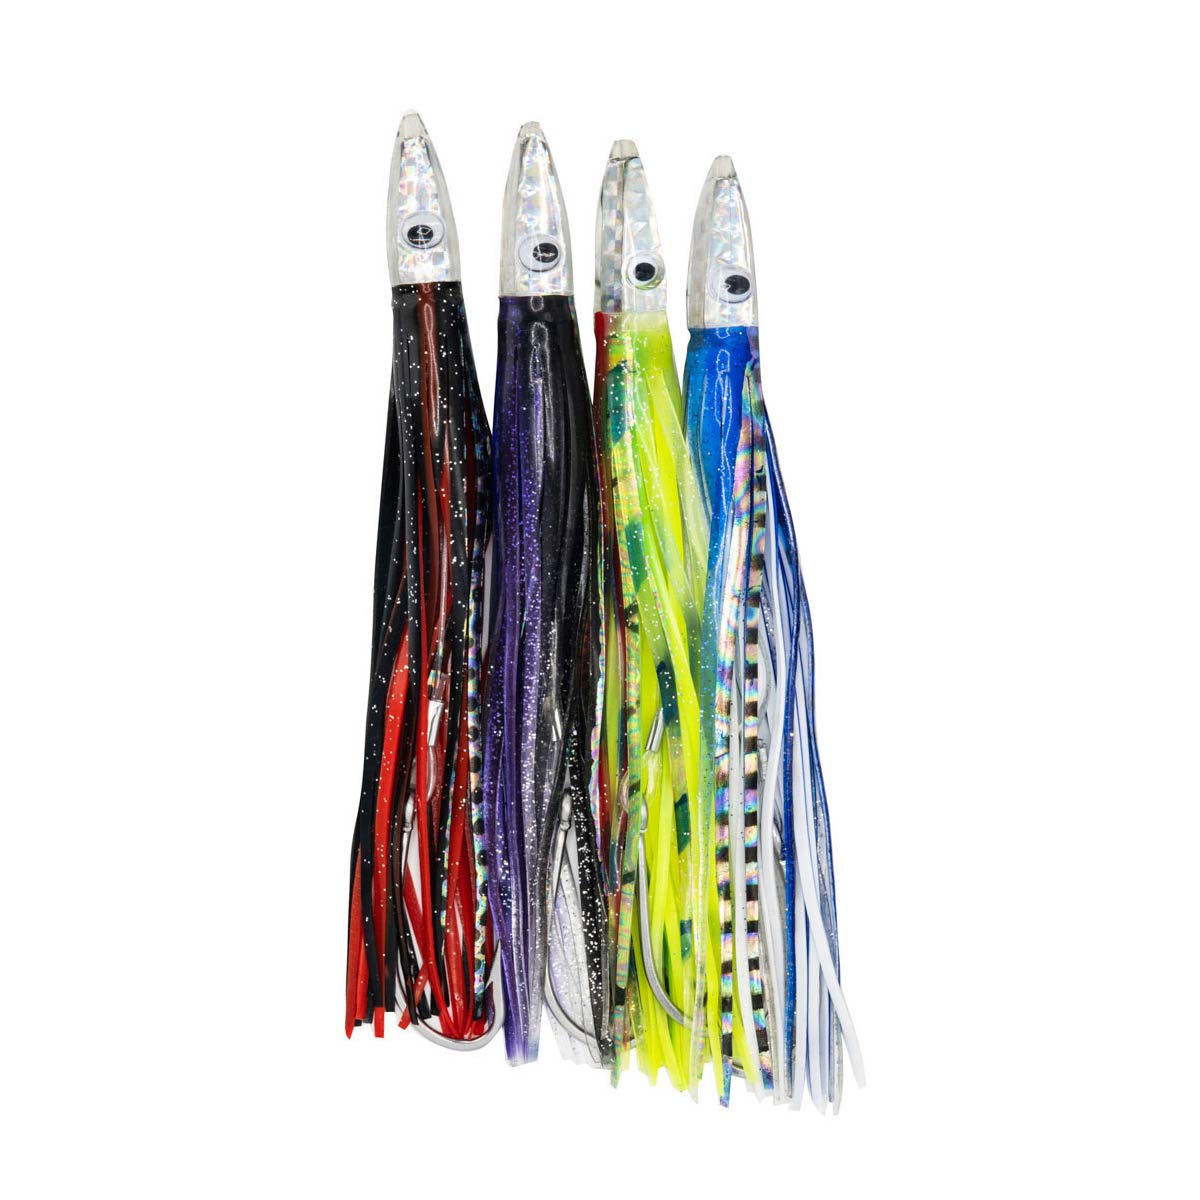 Superior Trolling Skirts for Marlin and Tuna Lures